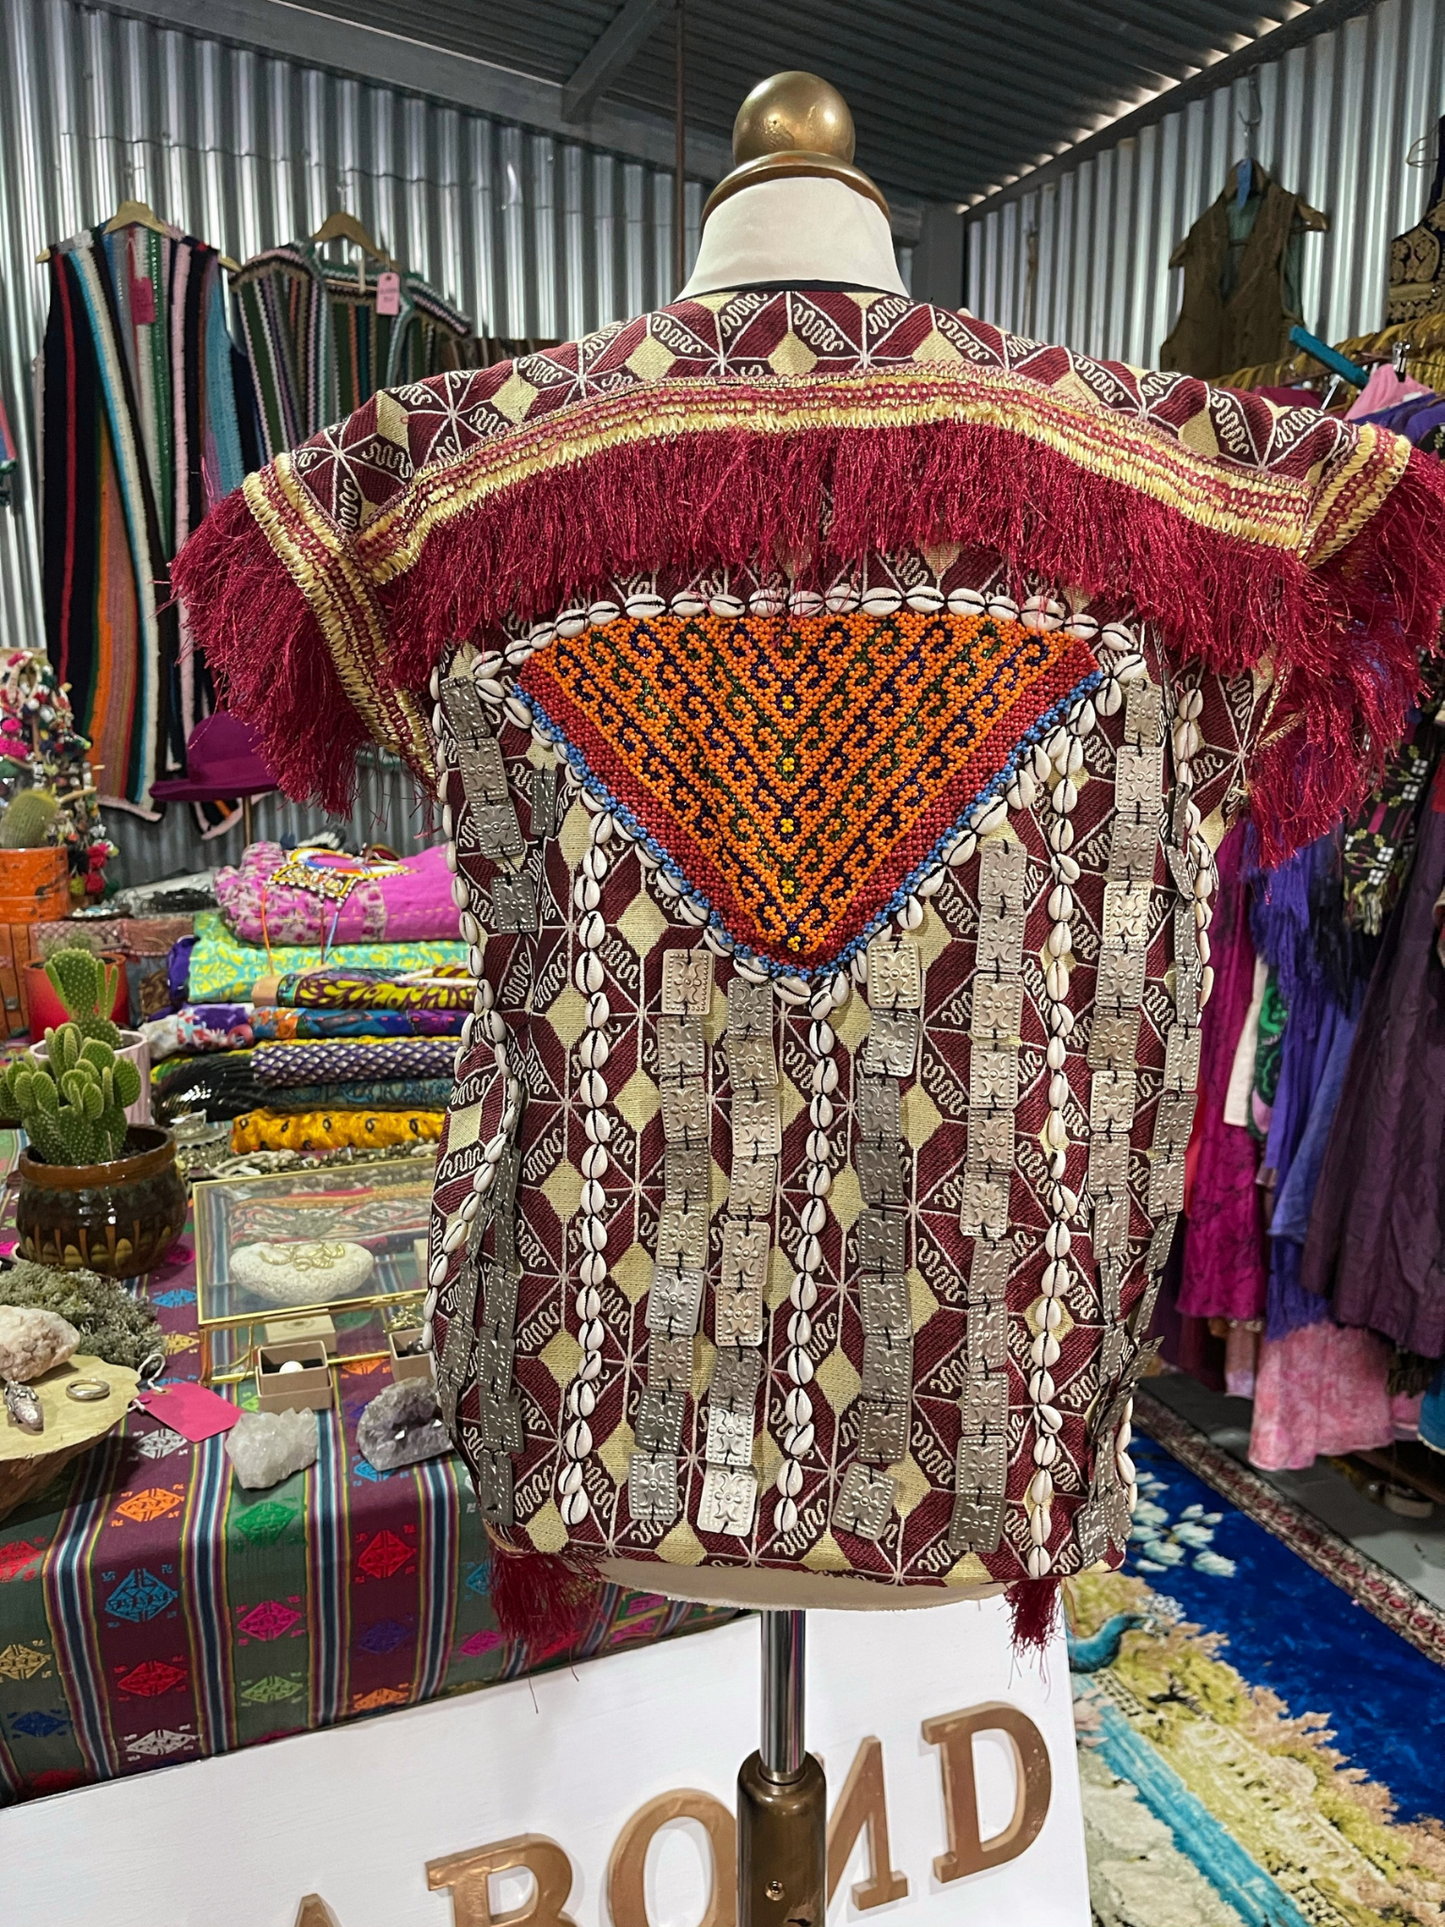 Amazing Embroidered Vintage Uzbekistan waistcoat with shell and metal beaded detail